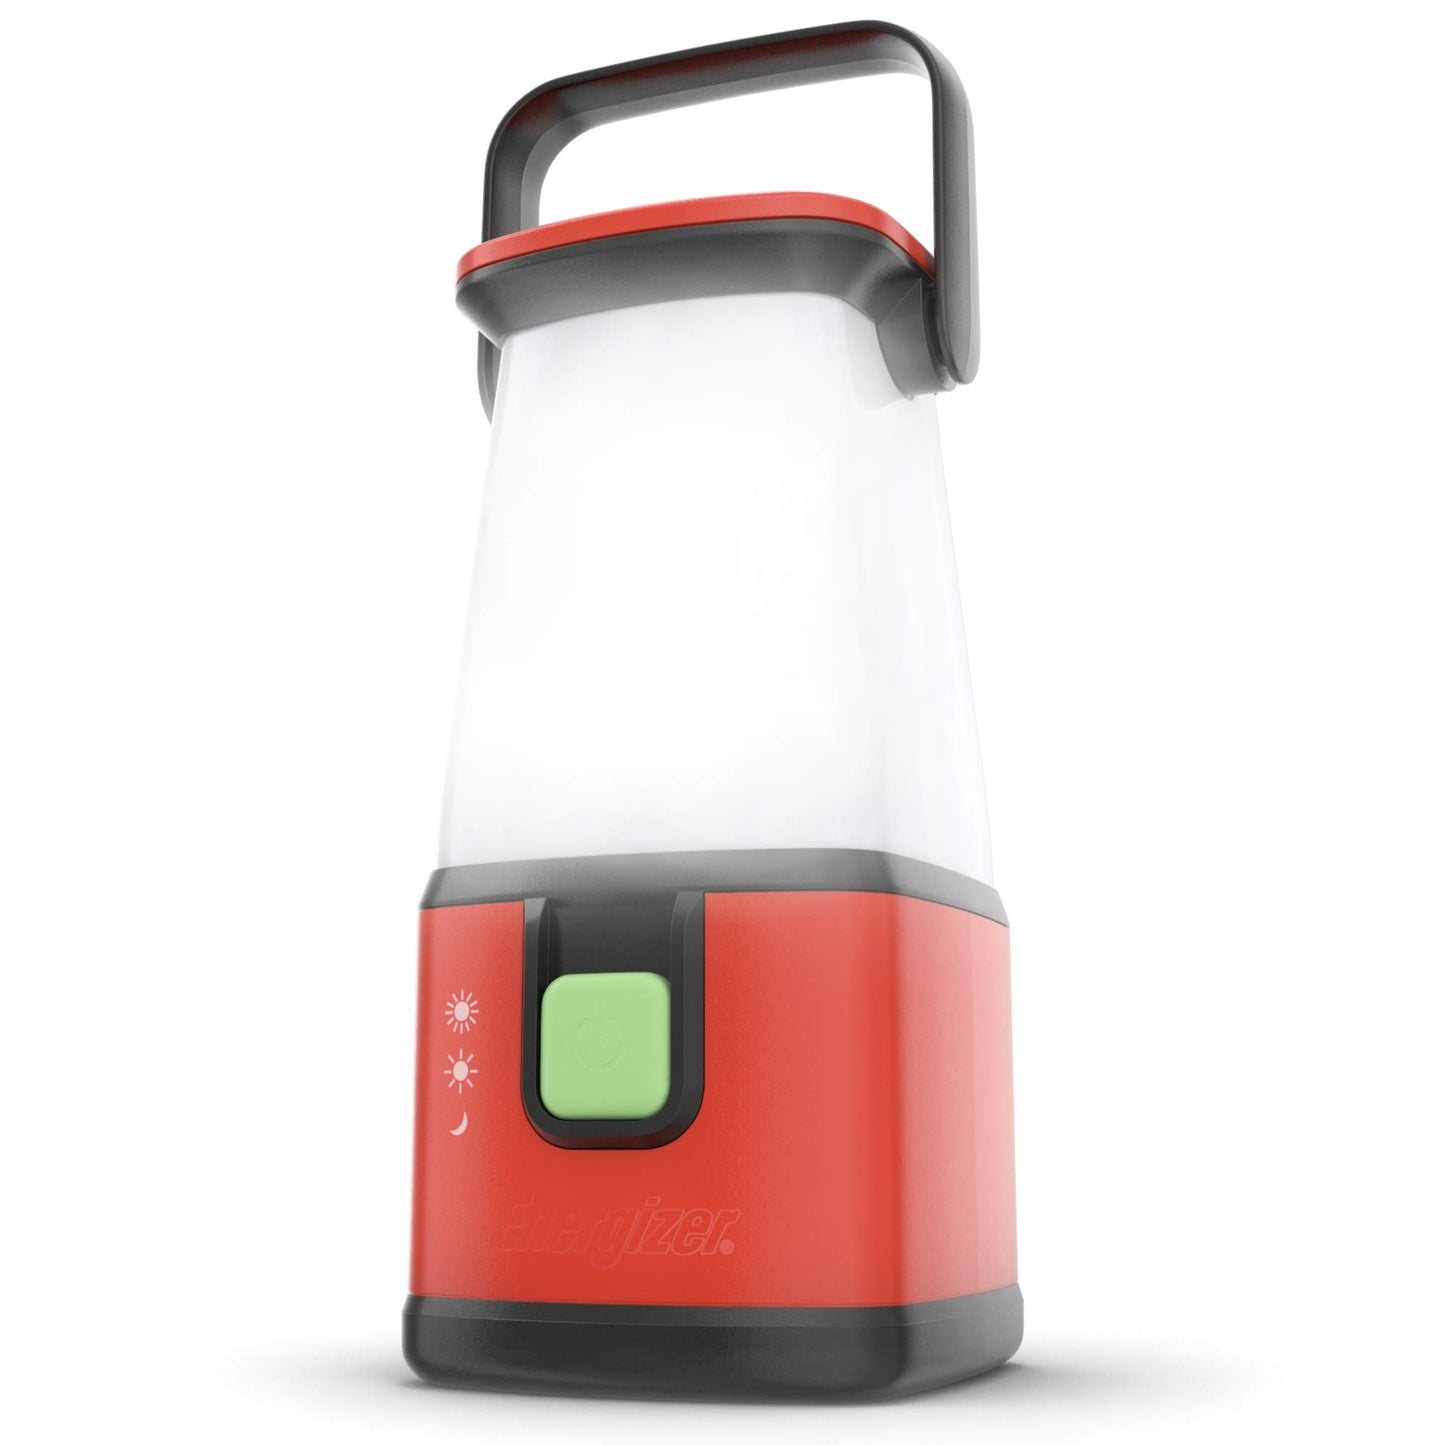 Energizer LED Camping Lantern, Battery Powered Camping Emergency Light, Water Resistant, Up to 650 Hour Run-time, Red